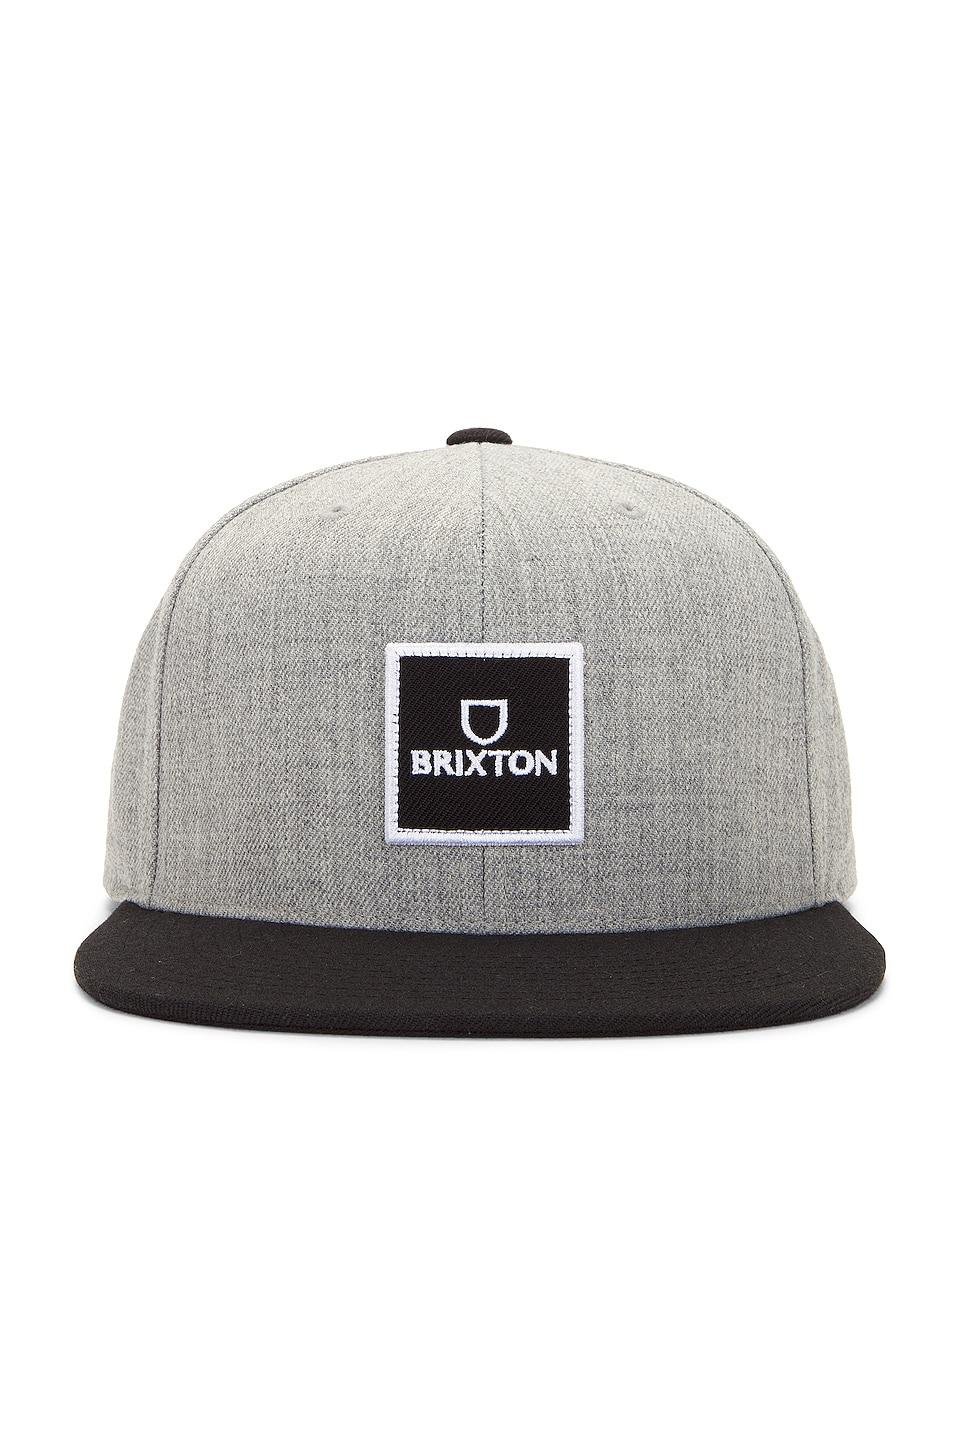 Brixton Alpha Square Mp Snapback Hat in Grey by BRIXTON